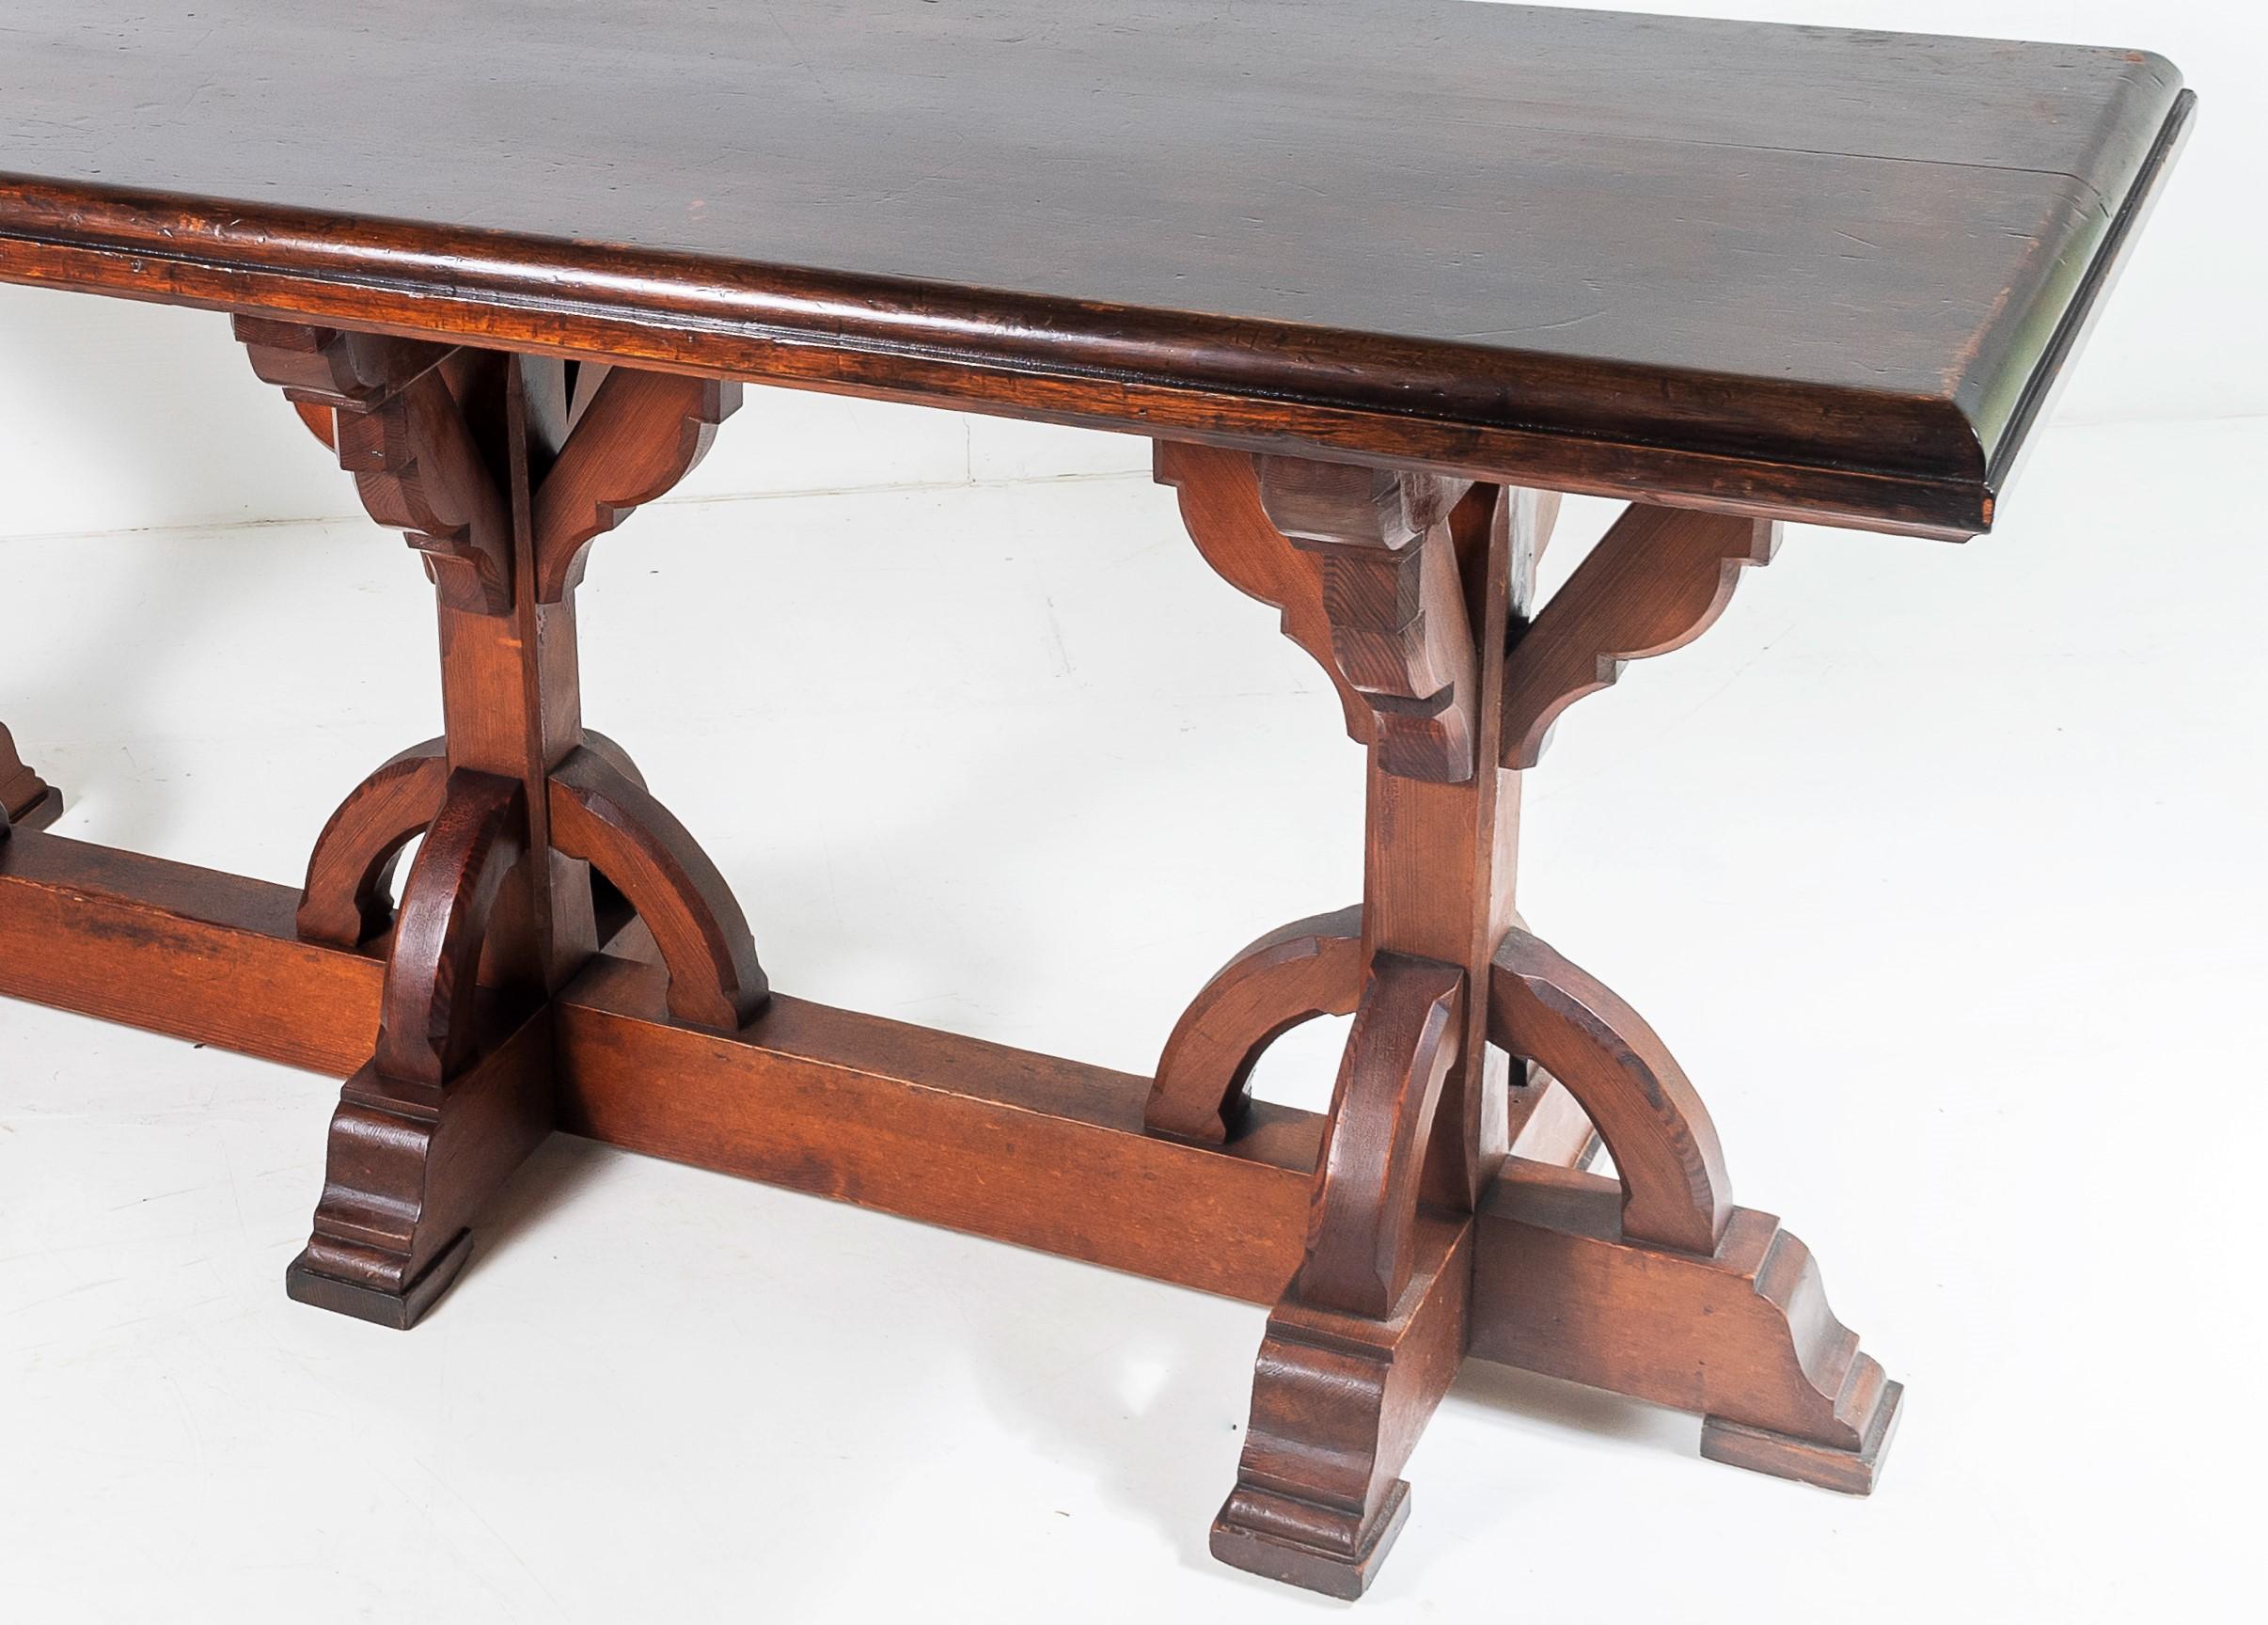 19th Century Large Scale Victorian Ecclesiastical Gothic Revival Table in the Manner of Pugin For Sale